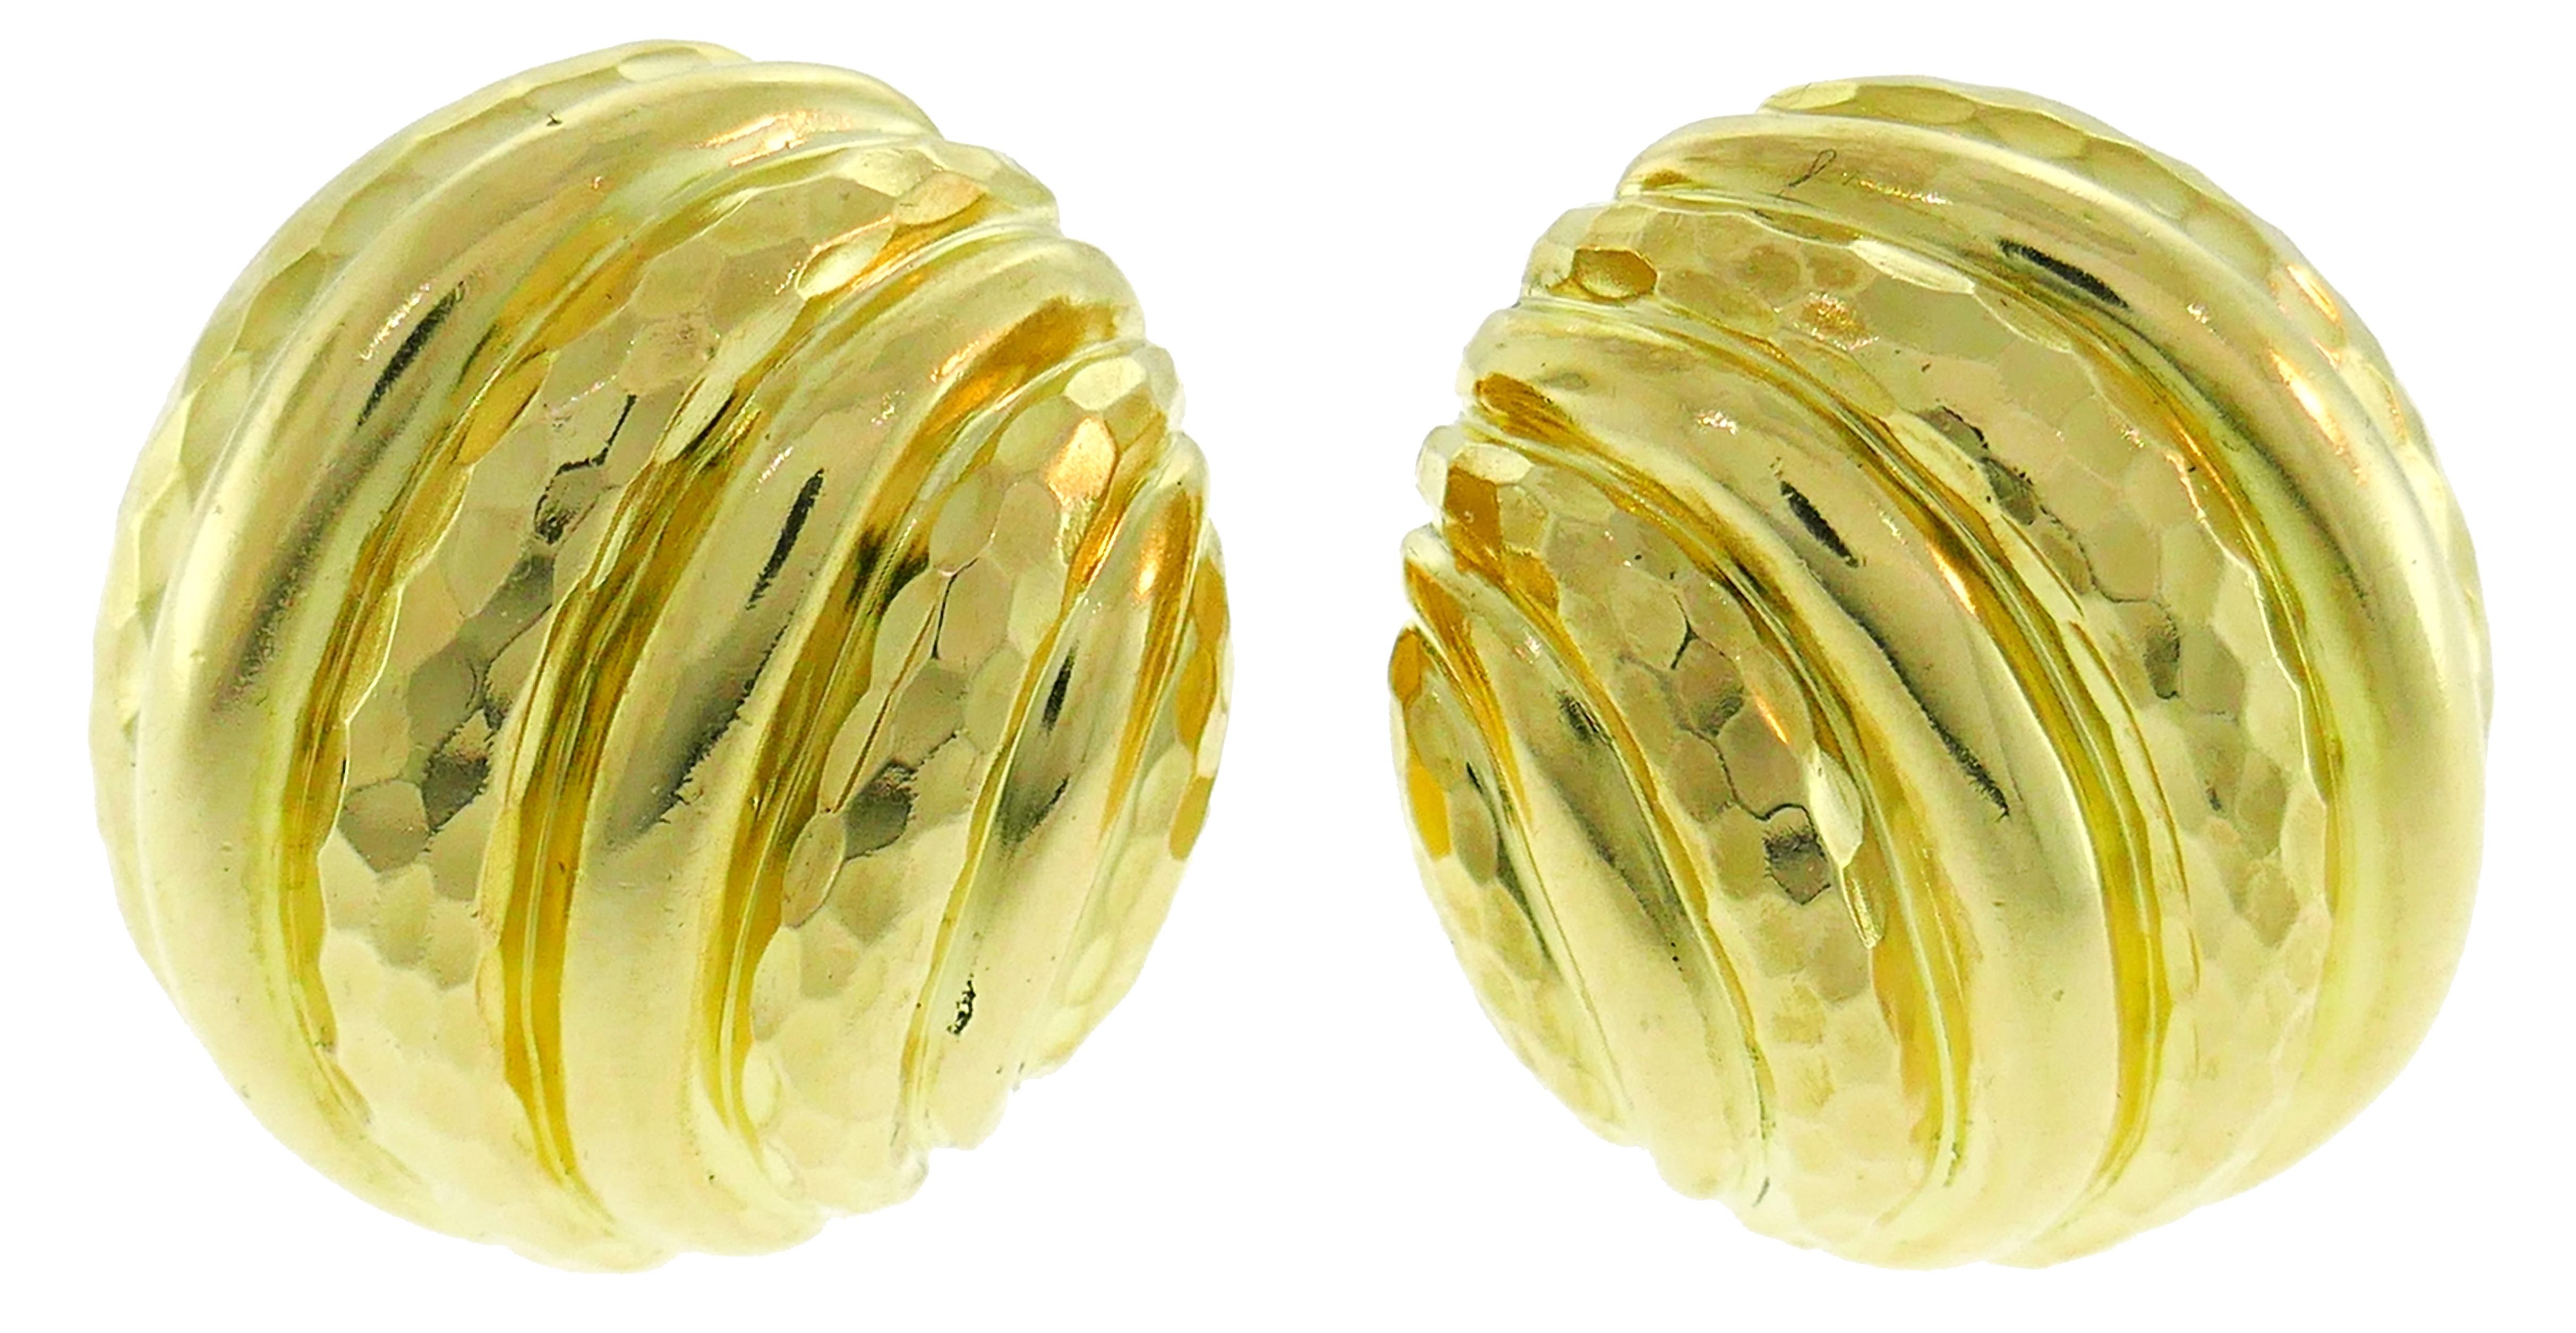 Bold and elegant clip-on earrings created by Andrew Clunn in the 1980s. Versatile, chic and wearable, the earrings are a great addition to your jewelry collection. 
Made of 18 karat (stamped) yellow gold, carved rock crystal and accented with a